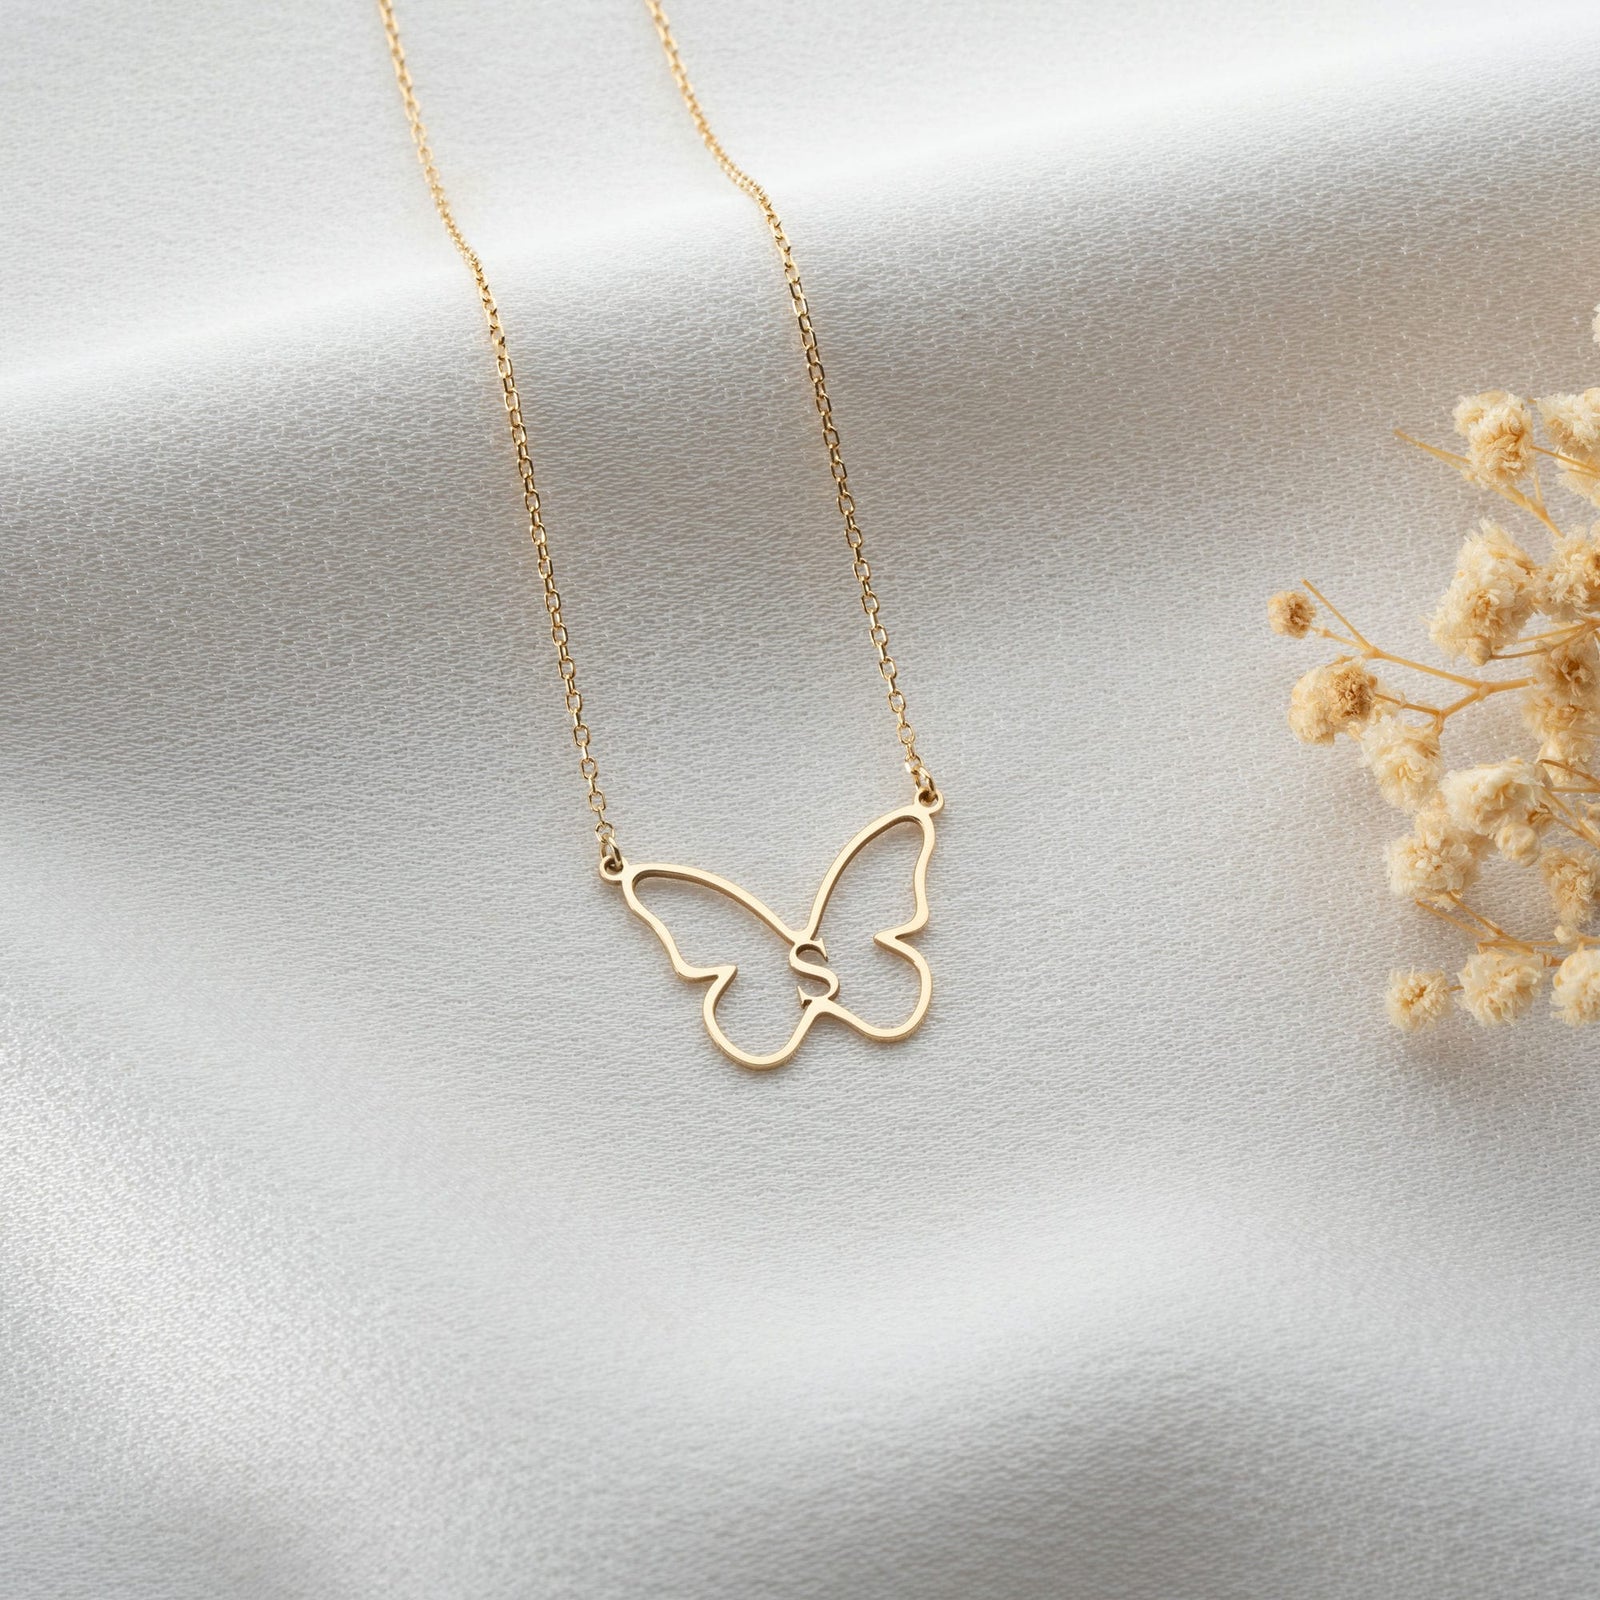 Initial Butterfly Necklace, Initial Necklaces, Butterfly Pendant,  Customized Letters, Personalized Gift, Necklace for Mom, Mothers Day Gifts  - Etsy | Initial necklace, Gold initial pendant, Pretty jewelry necklaces